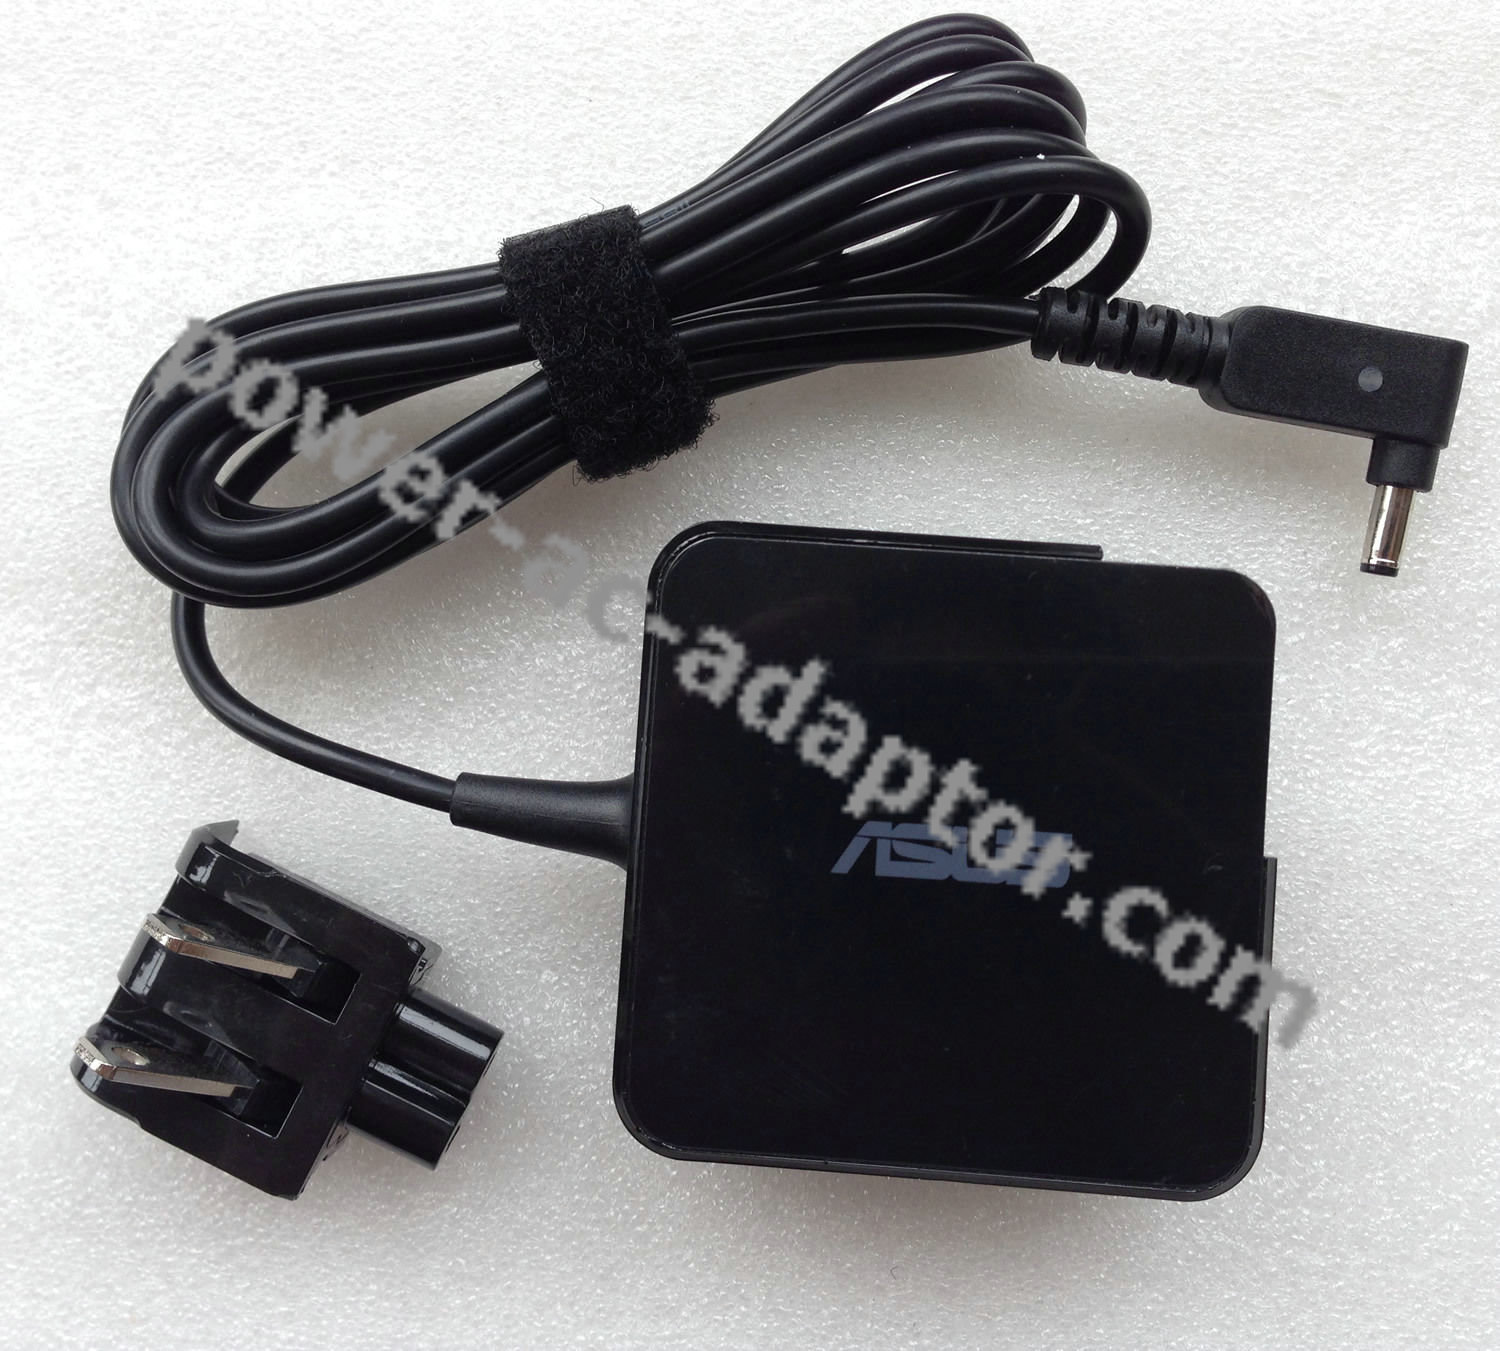 OEM ASUS 33W AC Power Adapter for Asus X553MA-XX233D Notebook